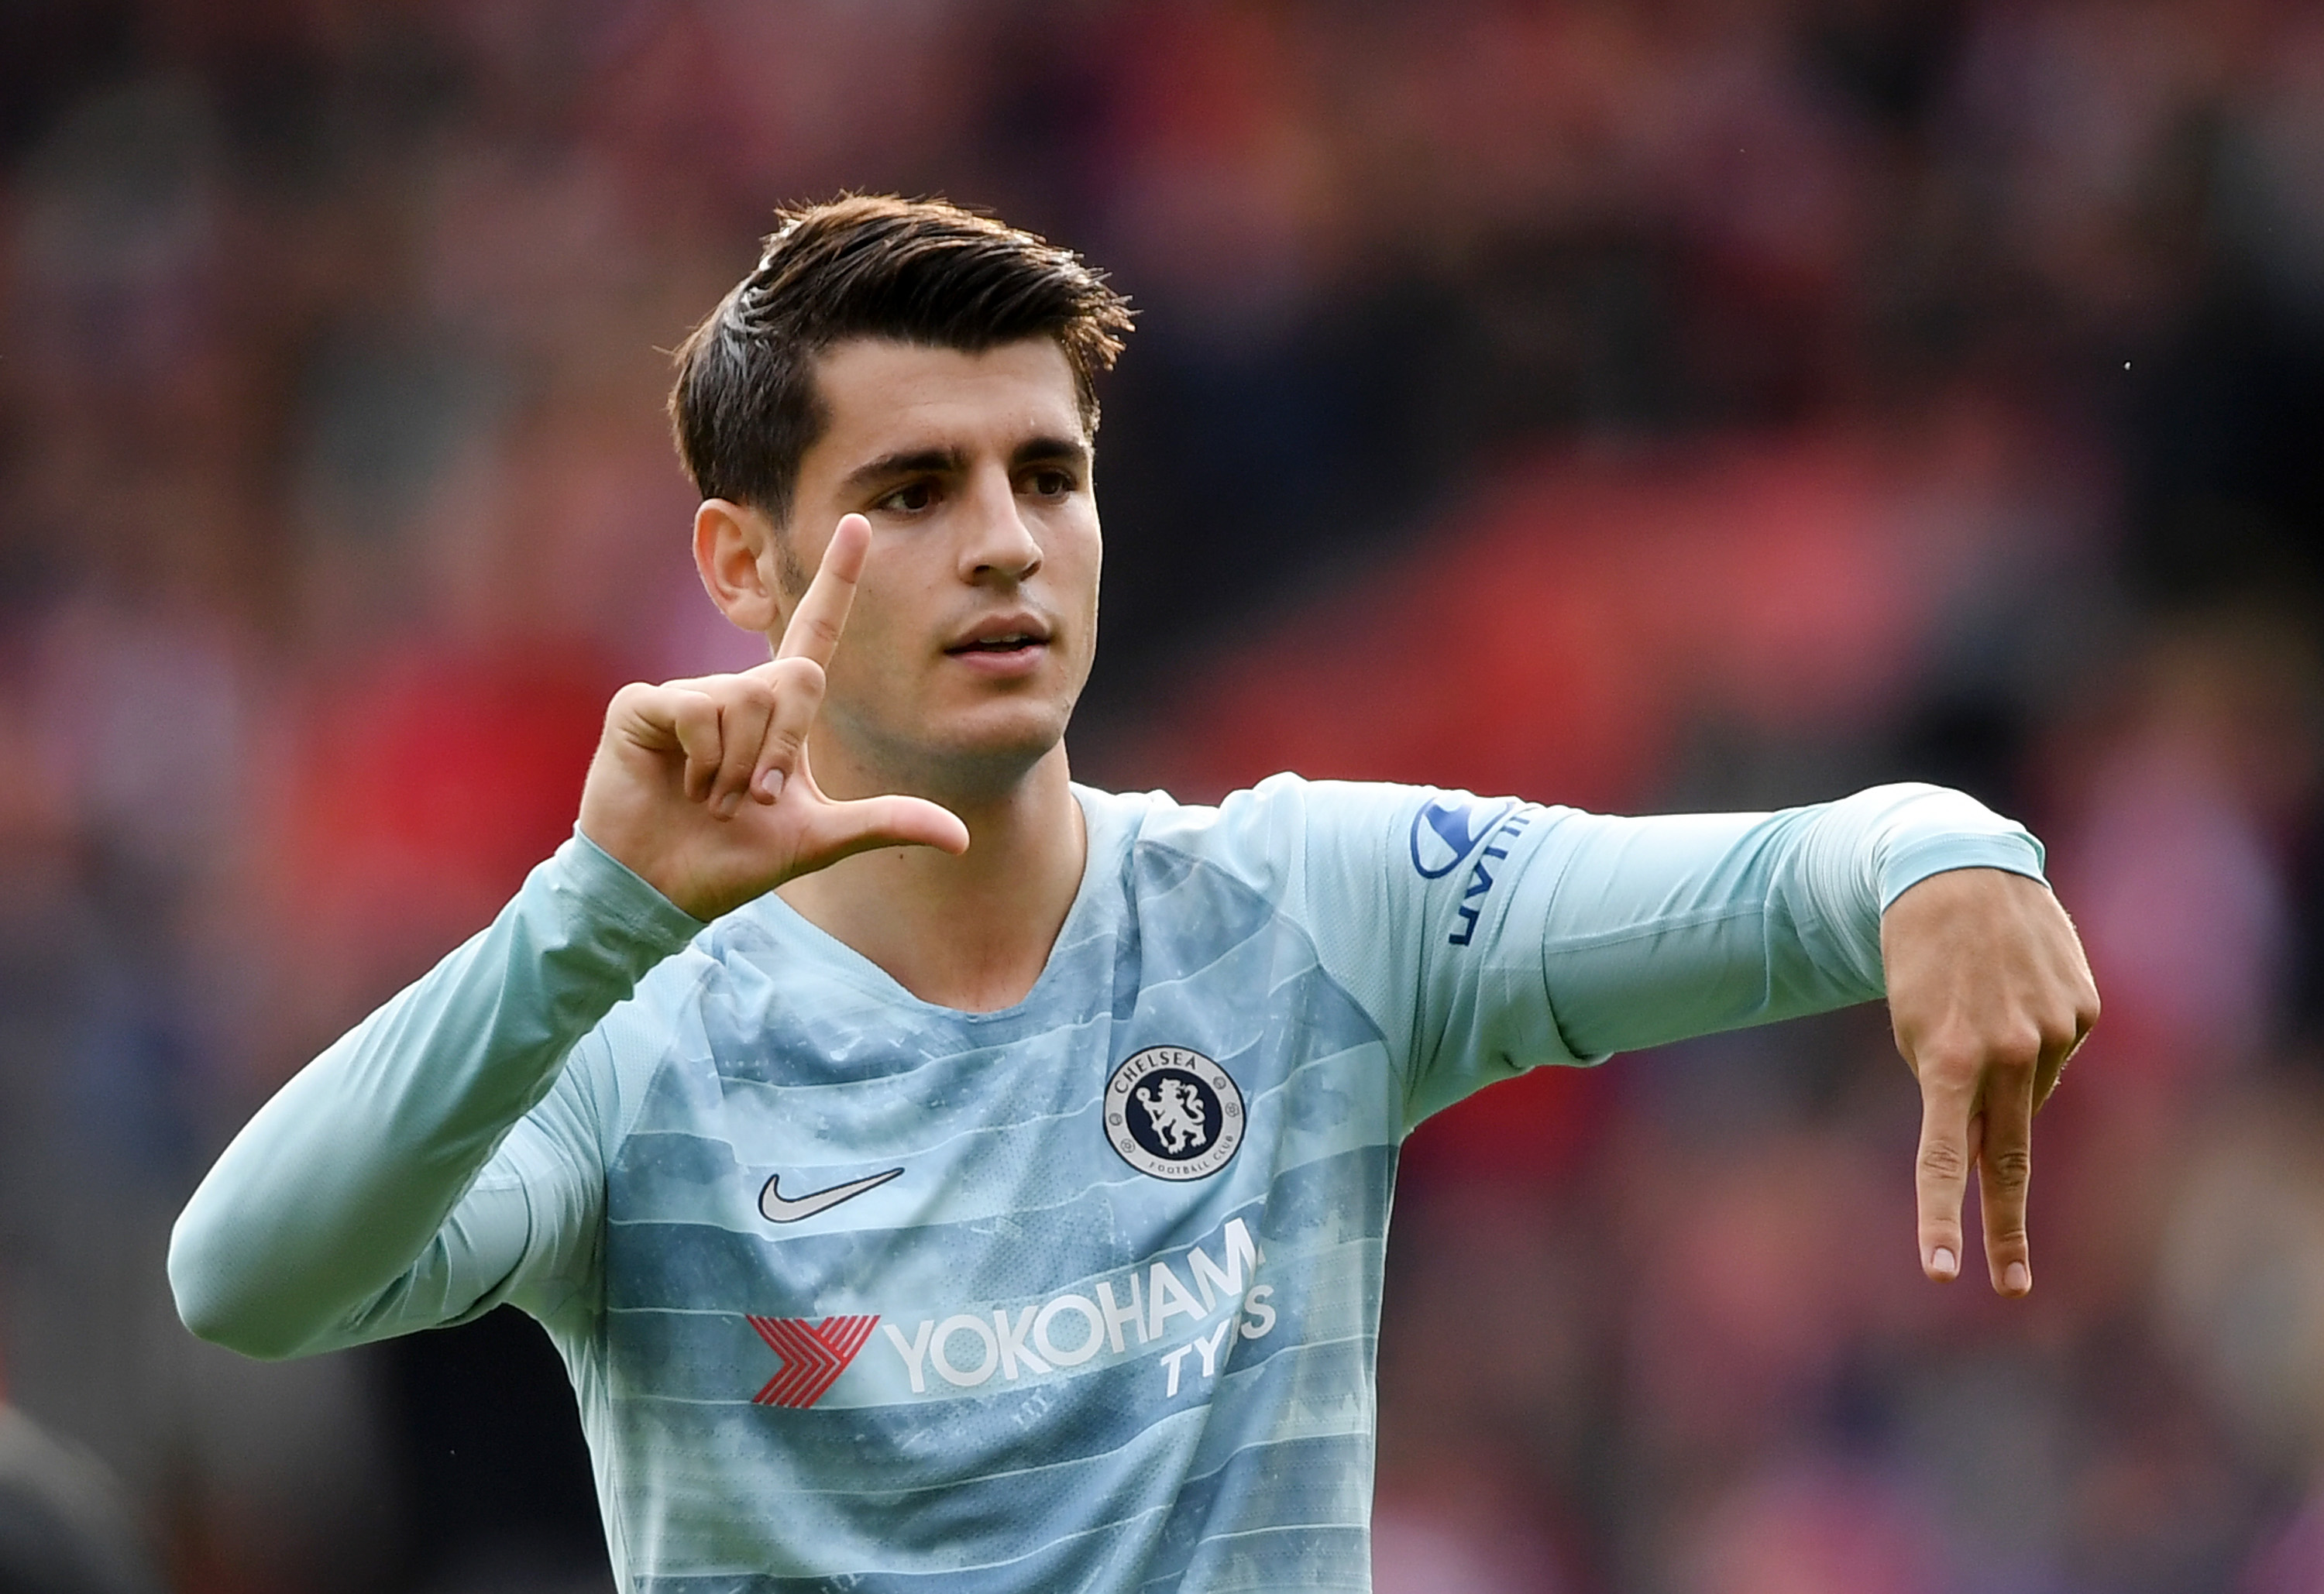 SOUTHAMPTON, ENGLAND - OCTOBER 07:  Alvaro Morata of Chelsea celebrates after scoring his team's third goal during the Premier League match between Southampton FC and Chelsea FC at St Mary's Stadium on October 7, 2018 in Southampton, United Kingdom.  (Photo by Mike Hewitt/Getty Images)